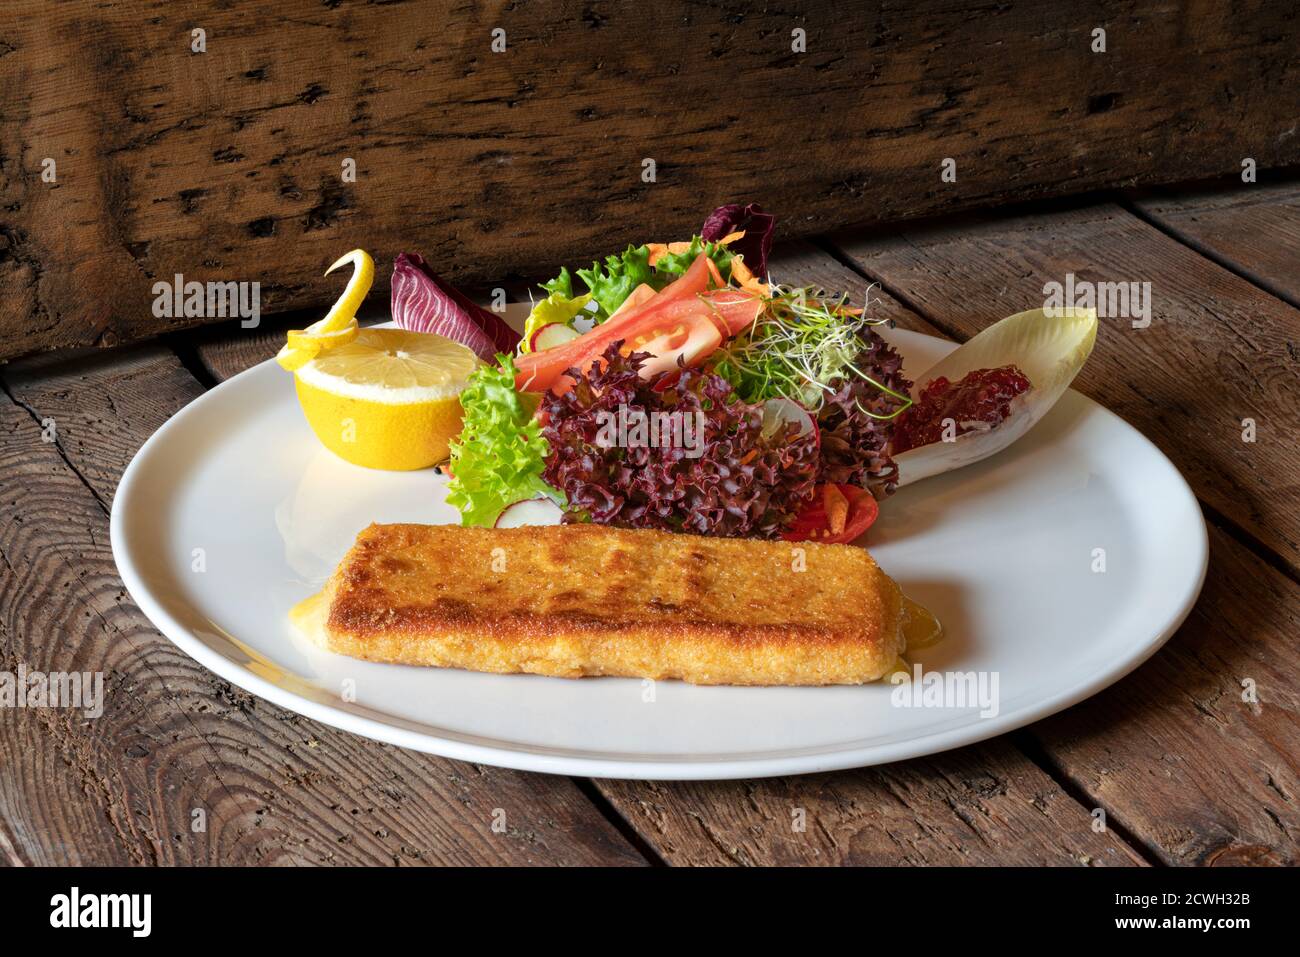 Dish with traditional Cotoletta fried meat with salad, Italy Stock Photo